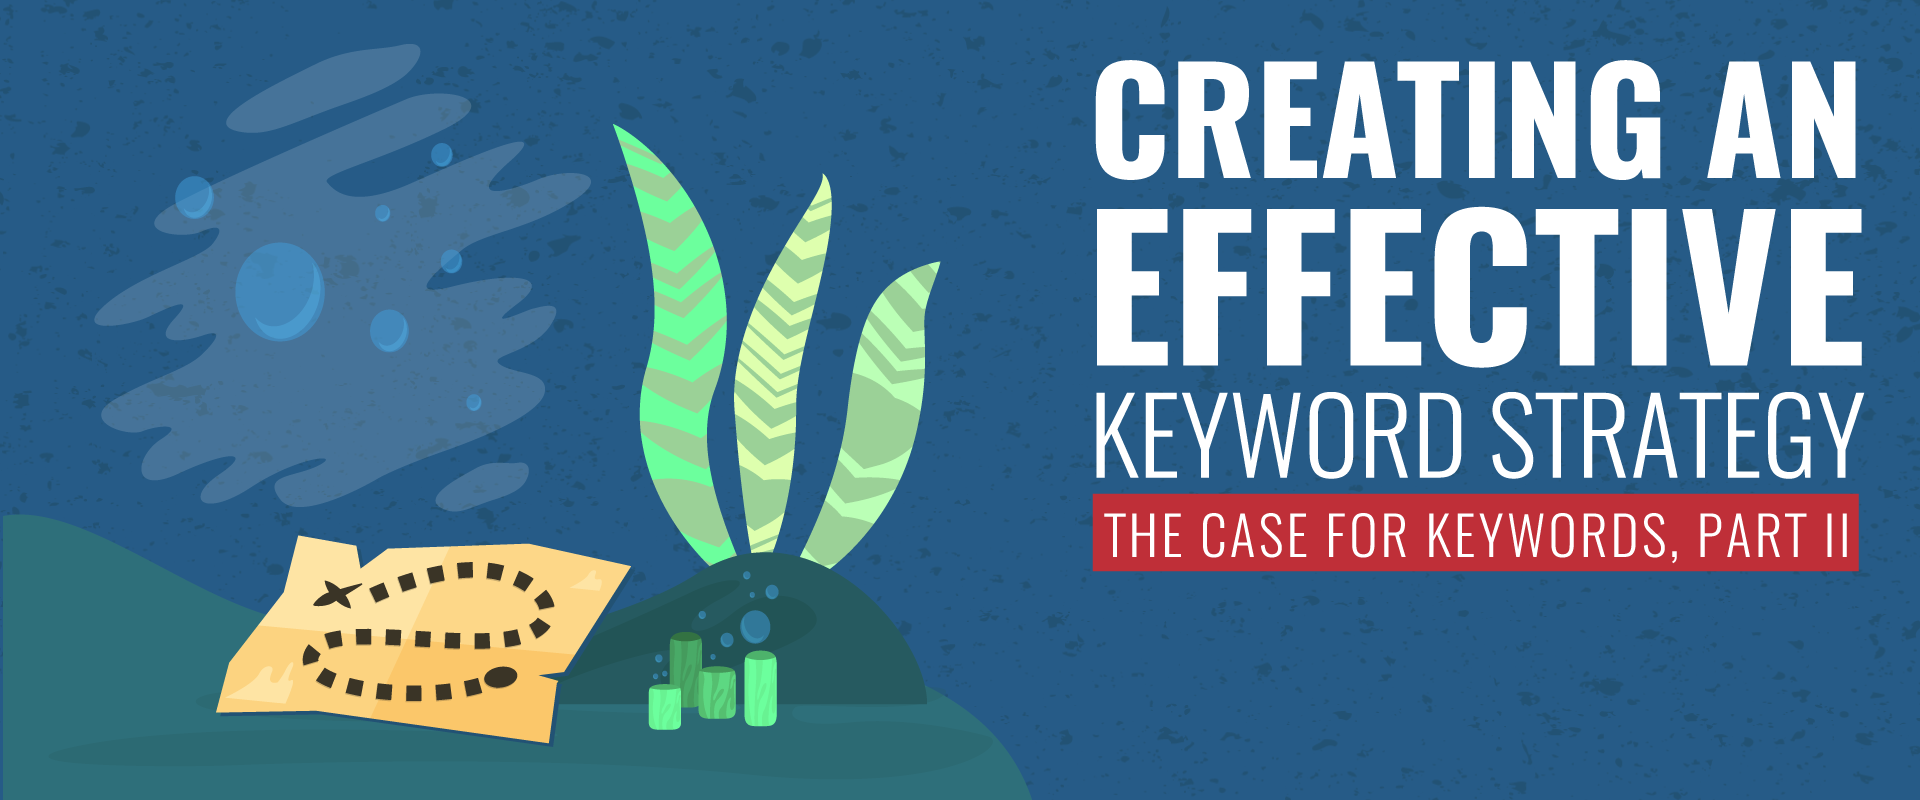 The Case For Keywords Creating An Effective Keyword Strategy Lessing Flynn 8810